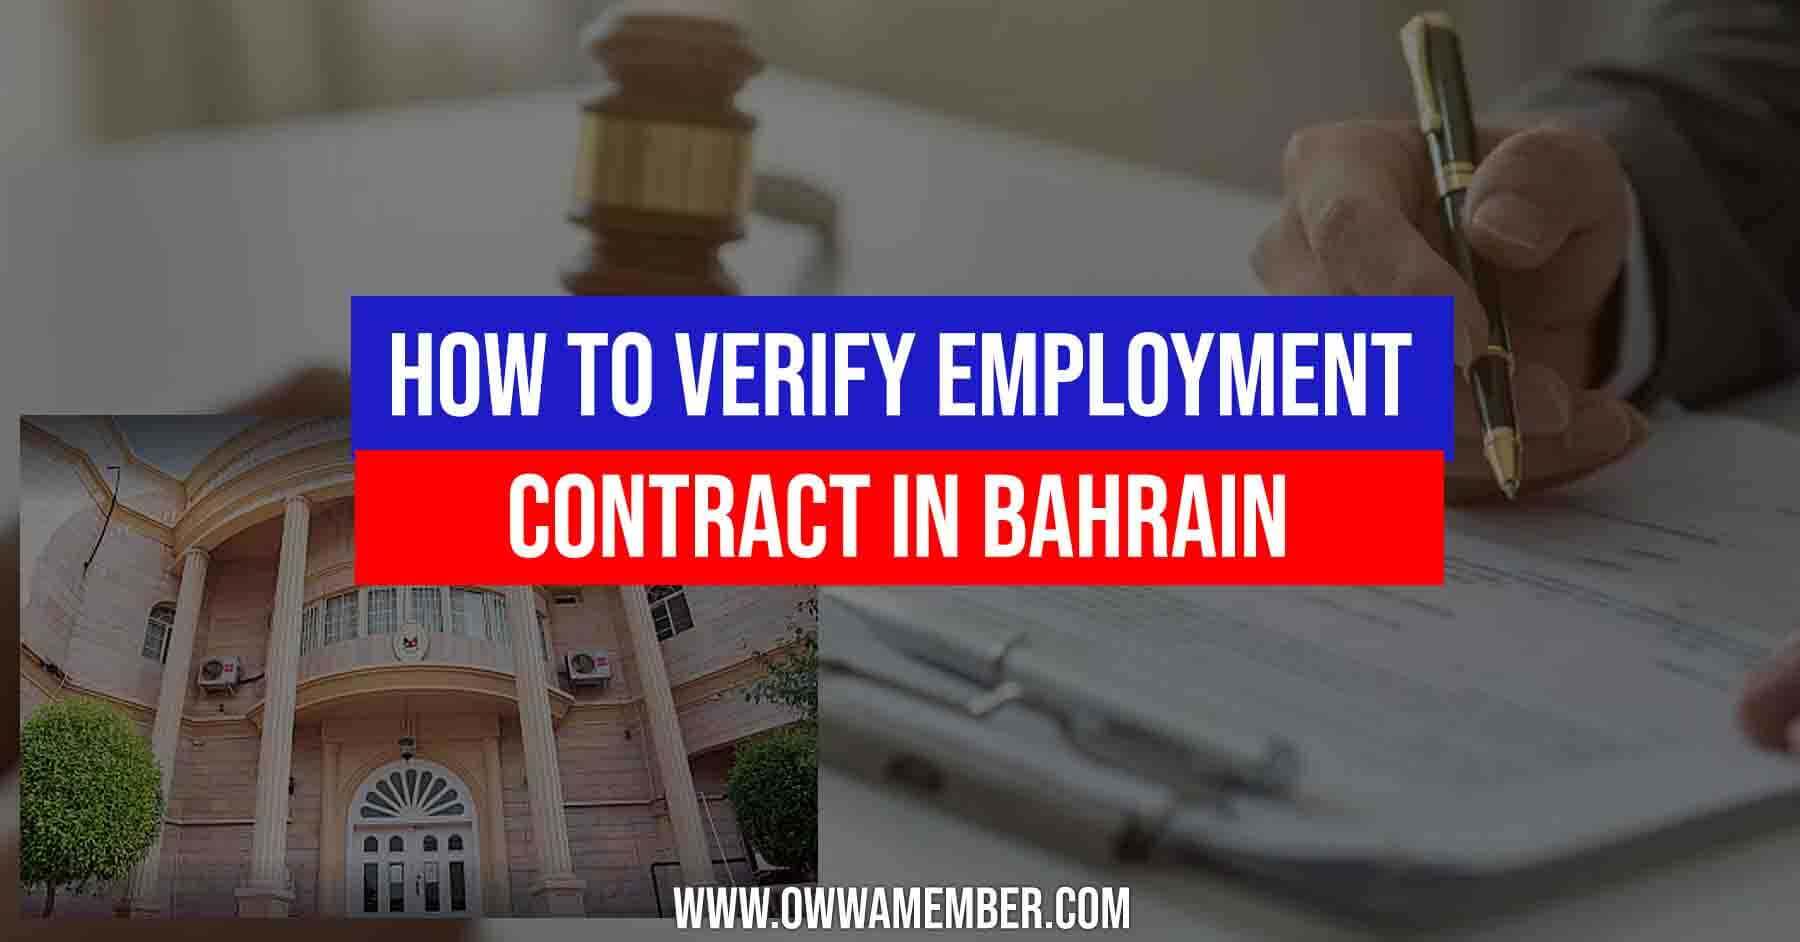 contract verification process in bahrain